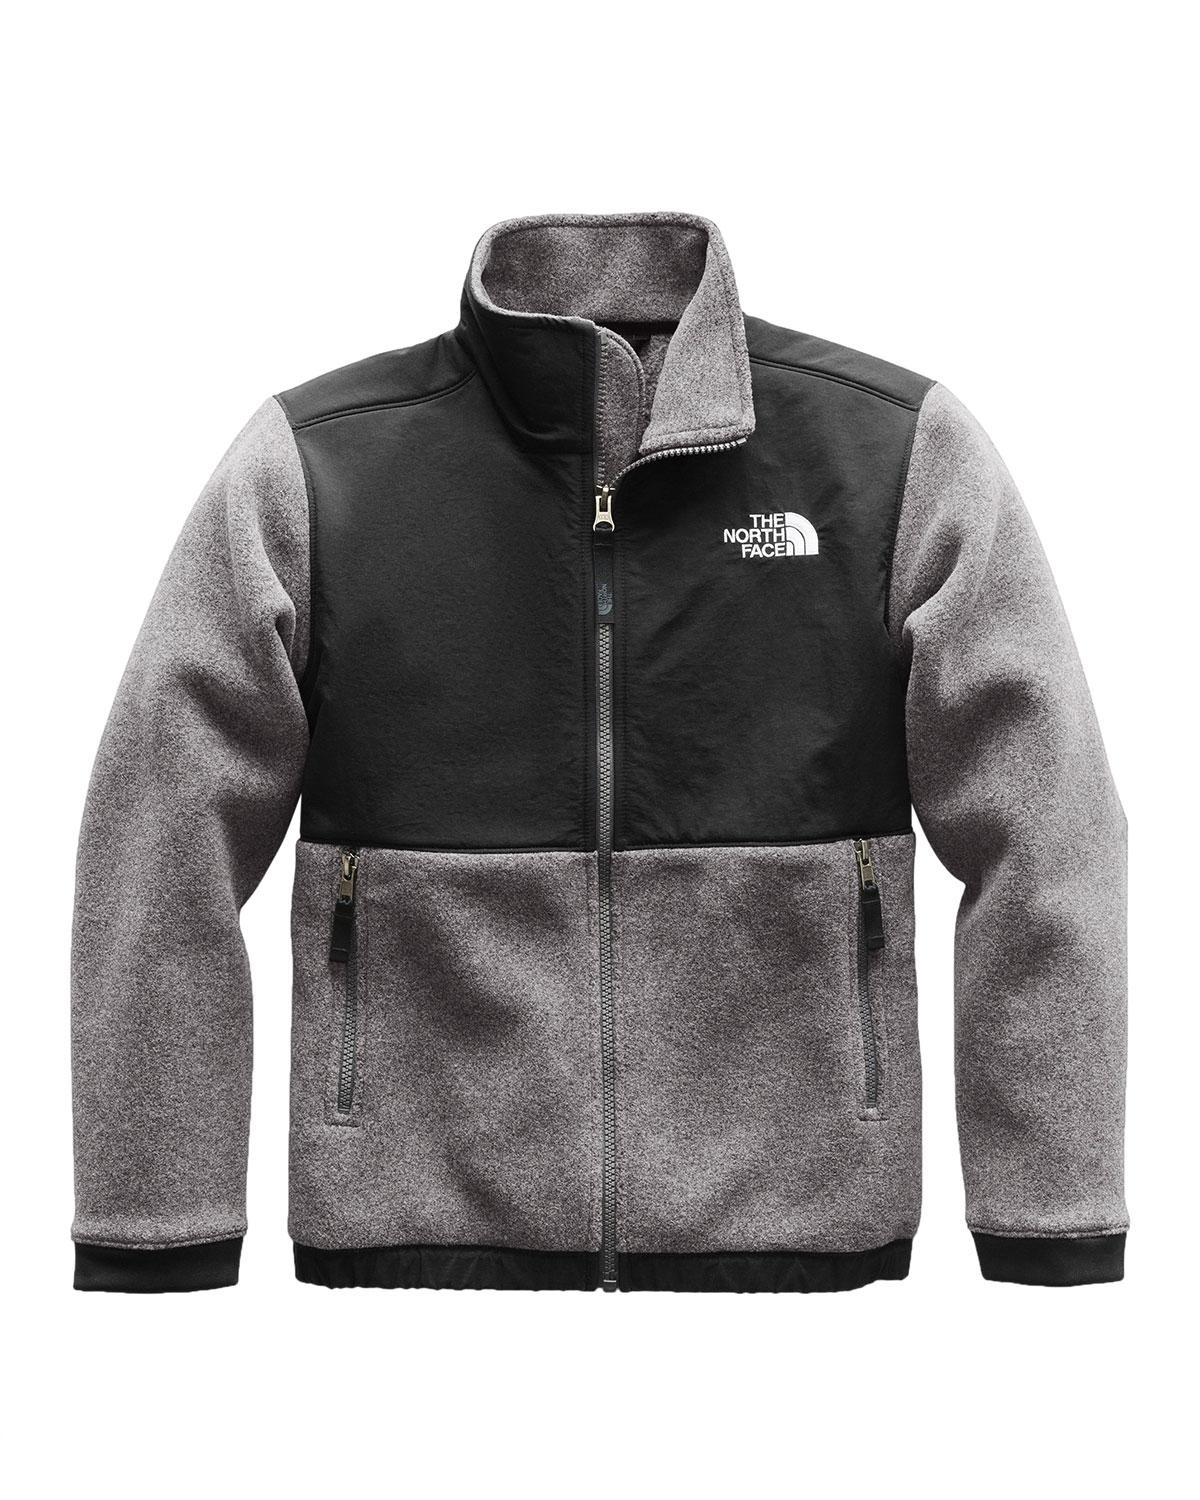 The North Face Denali Two-tone Fleece Jacket in Gray for Men - Lyst